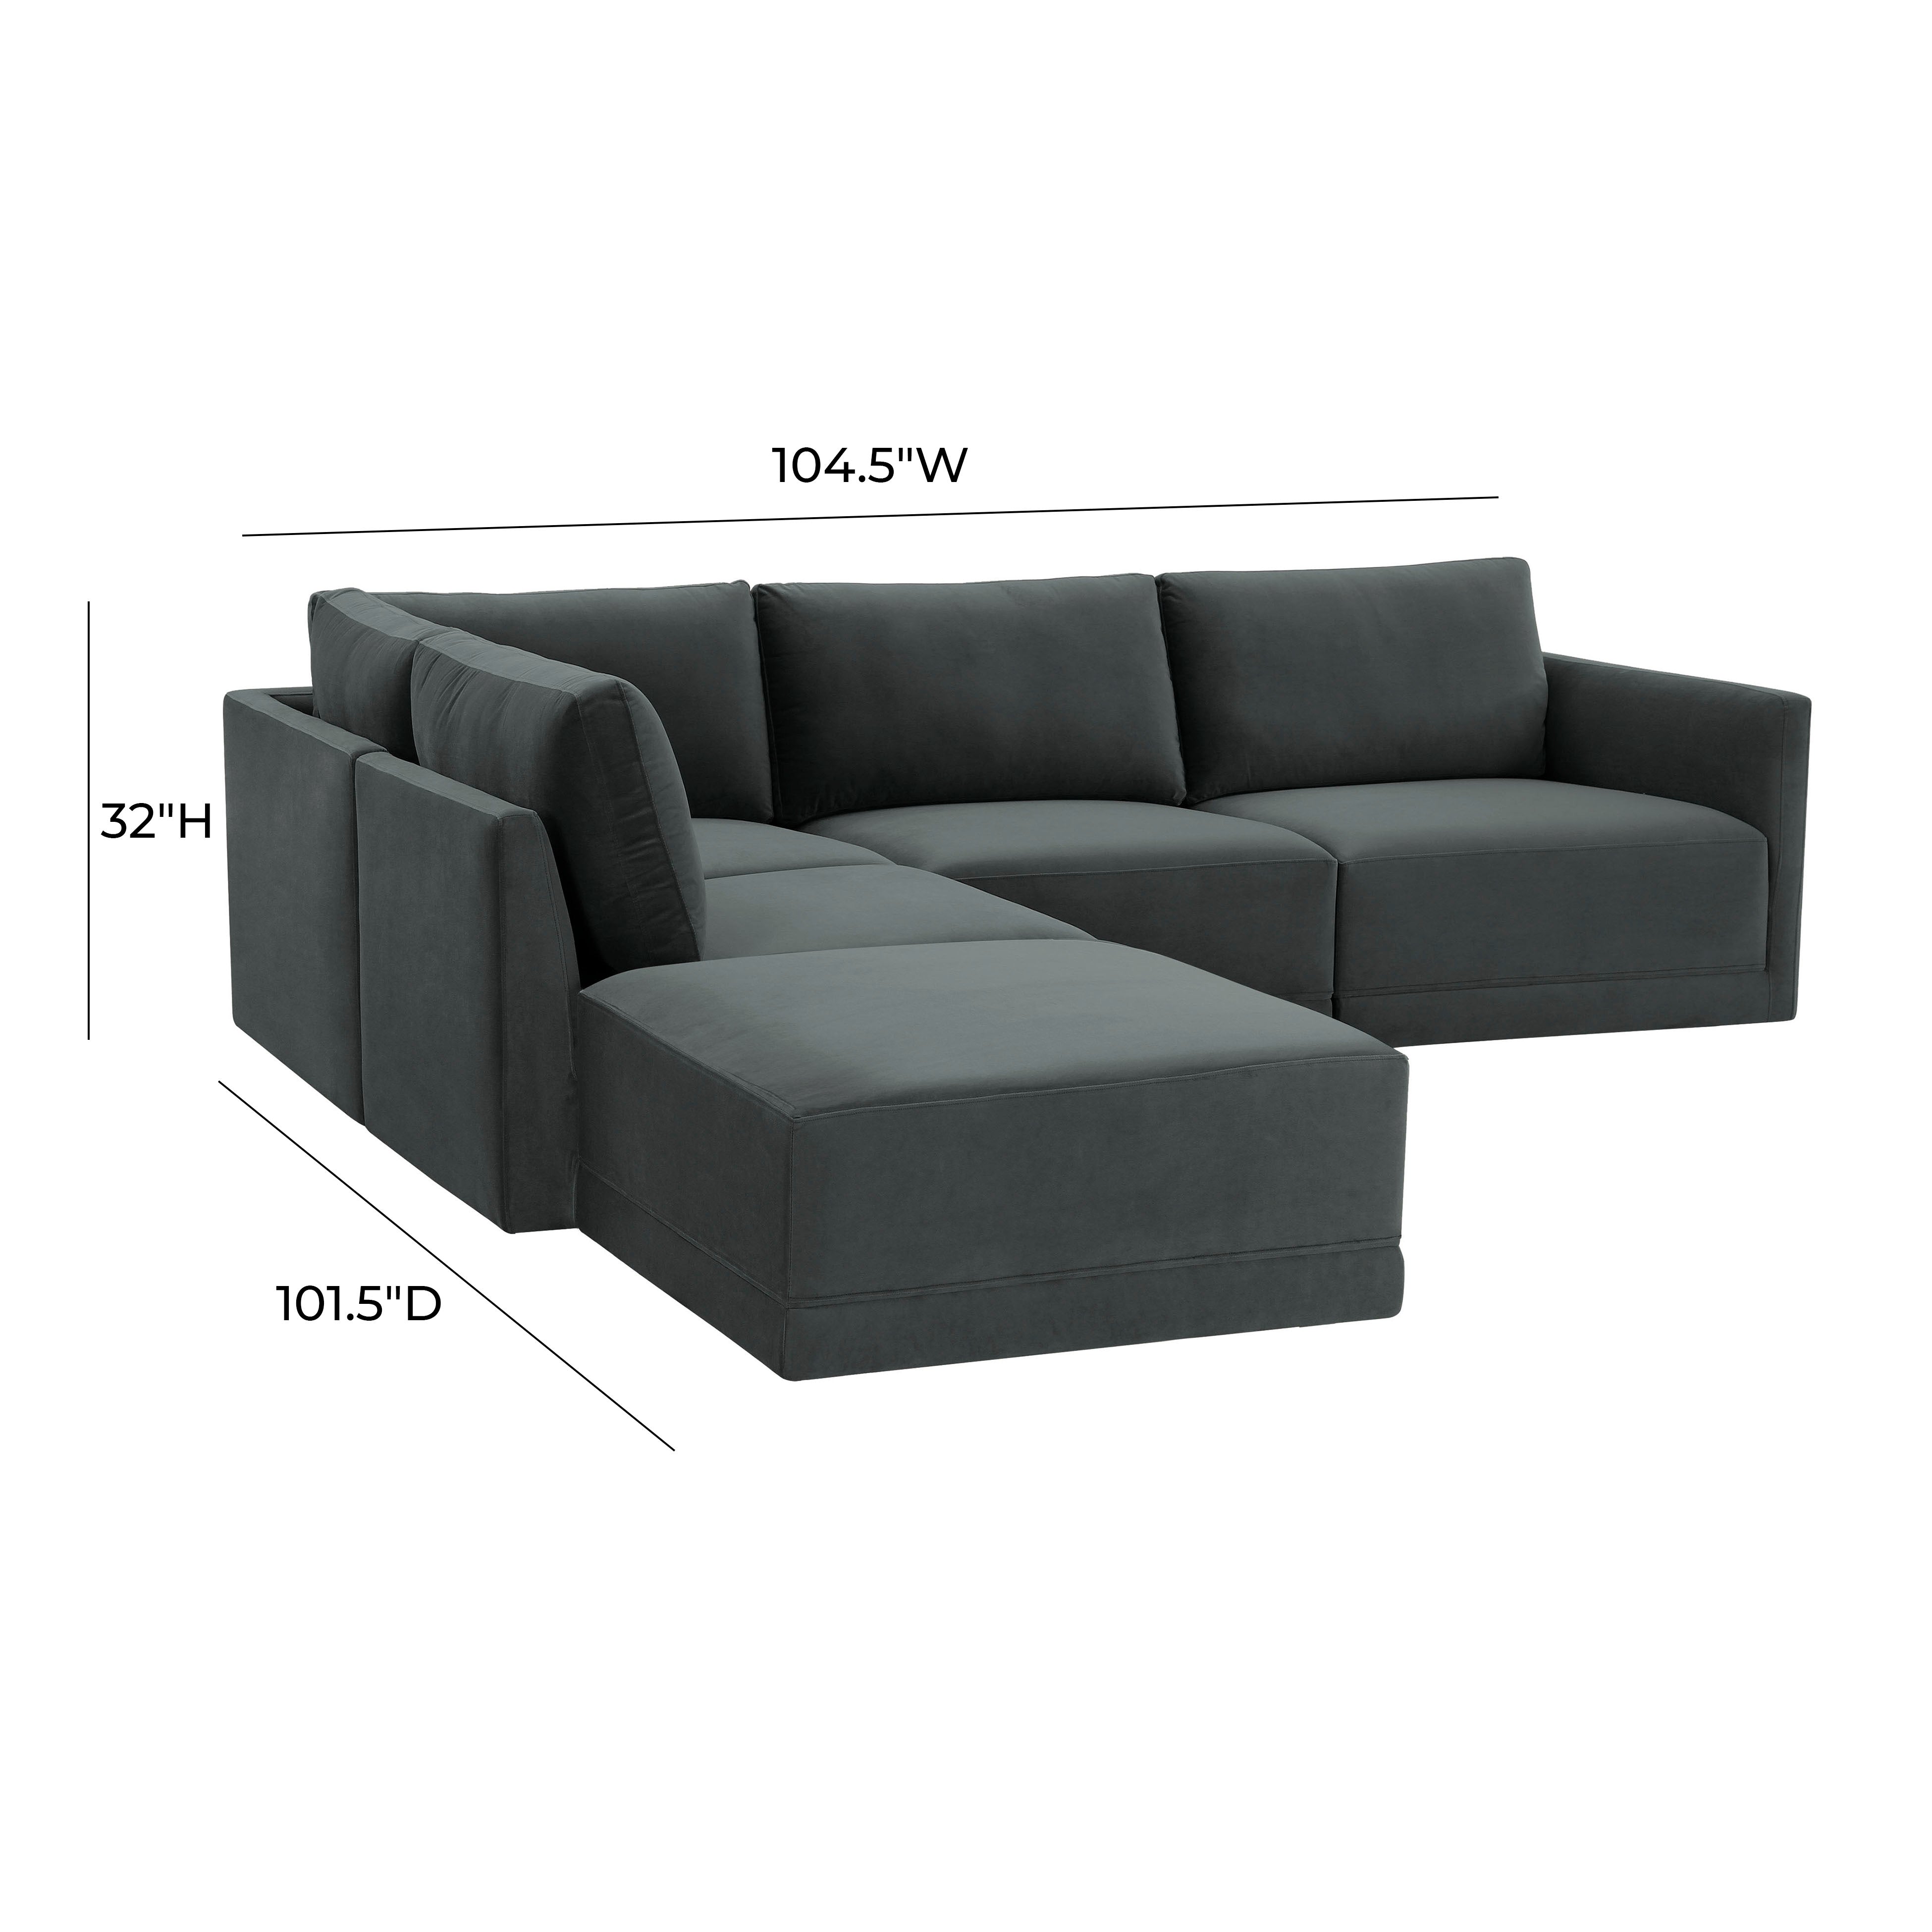 WILLOW TAUPE MODULAR 7 PIECE LARGE CHAISE SECTIONAL